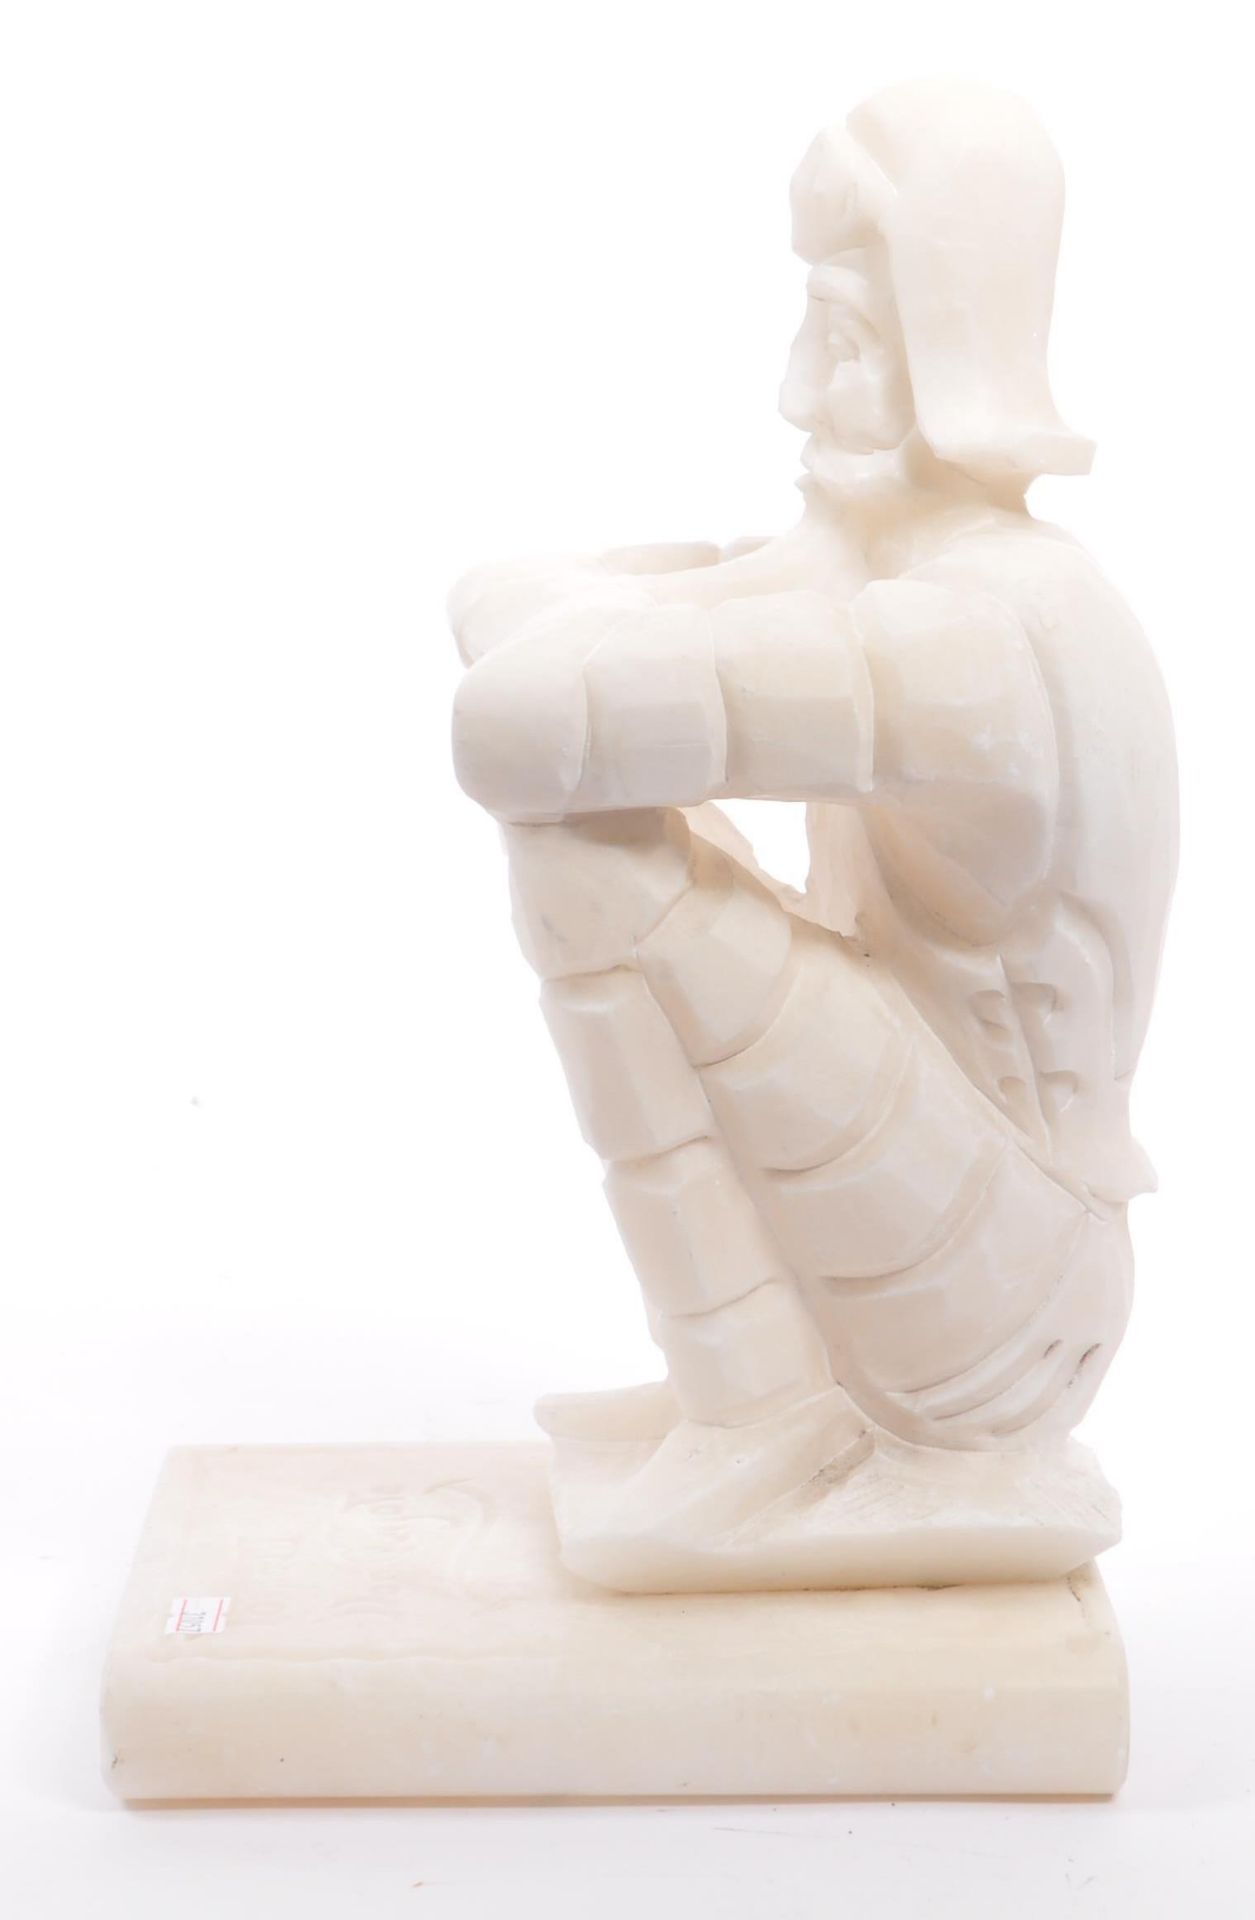 LARGE 20TH CENTURY CARVED ALABASTER BOOKENDS - Image 3 of 5